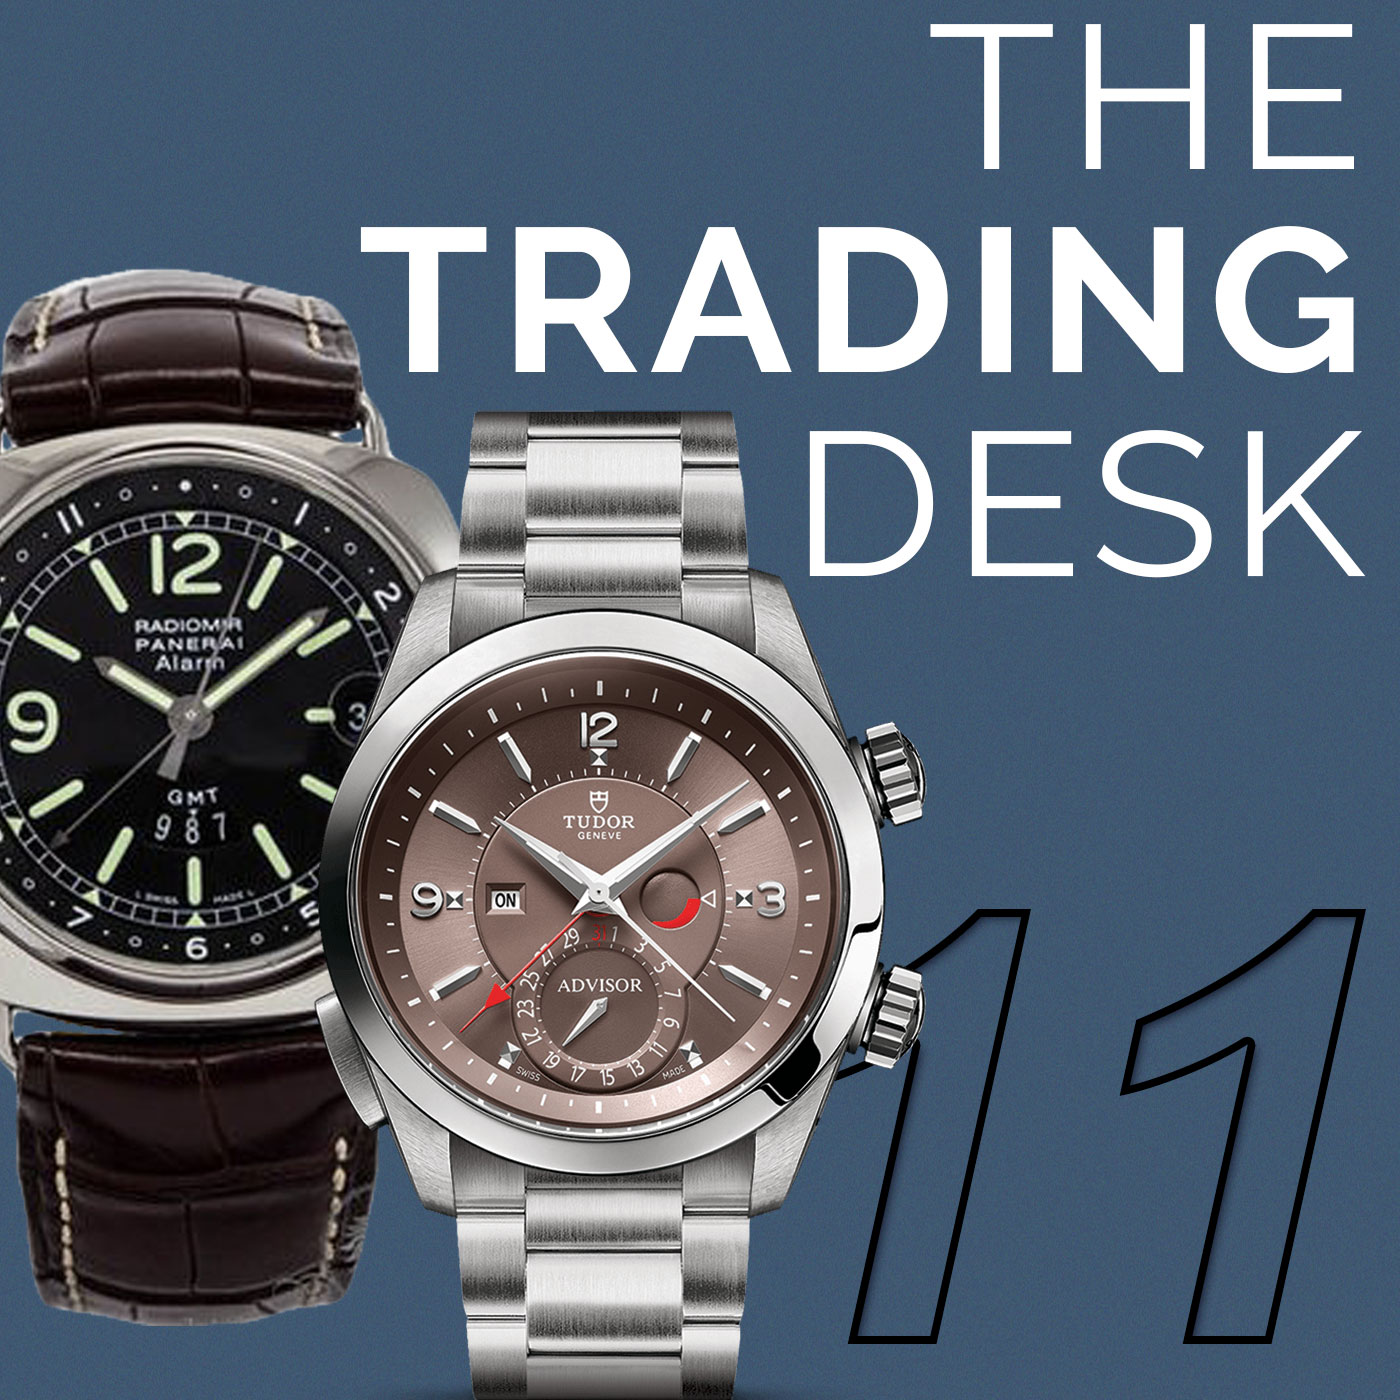 011: Looking at Entry Level Watches and Warranties